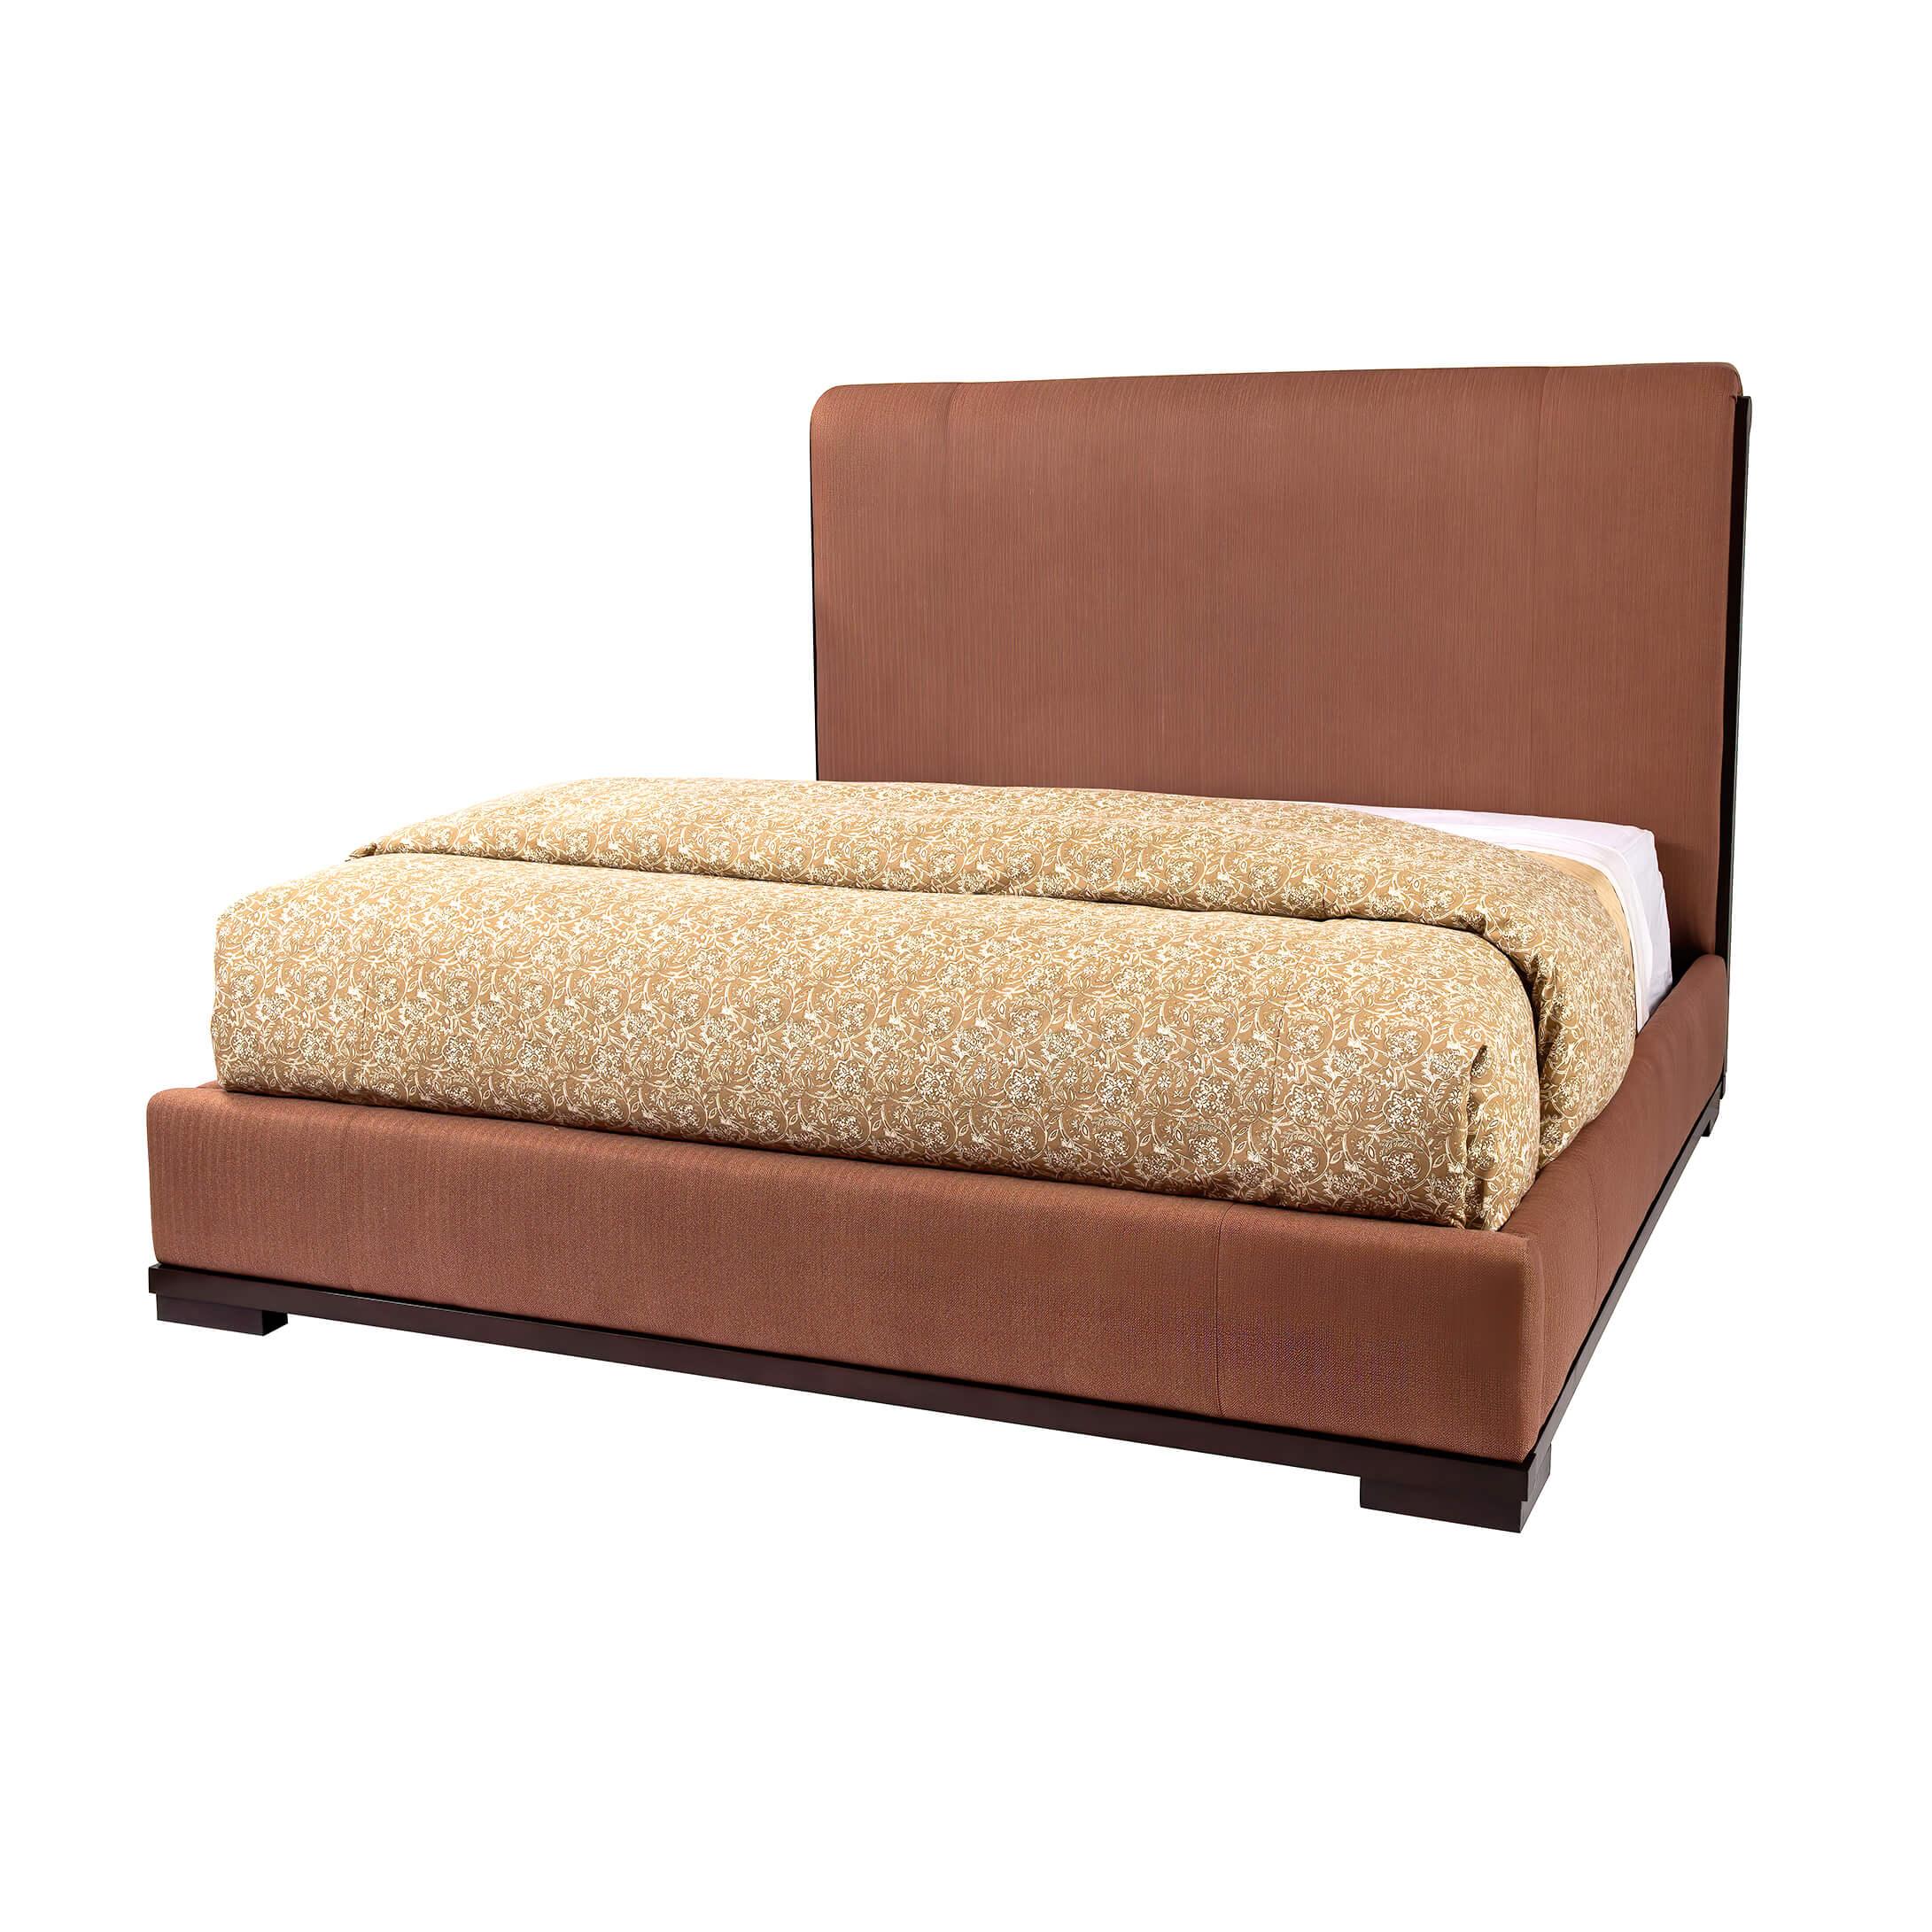 A modern upholstered bed wit a generously padded headboard with wood trim inlaid on each side, an upholstered foot and side rails, and set of a wooden base with block feet.
Dimensions: 89